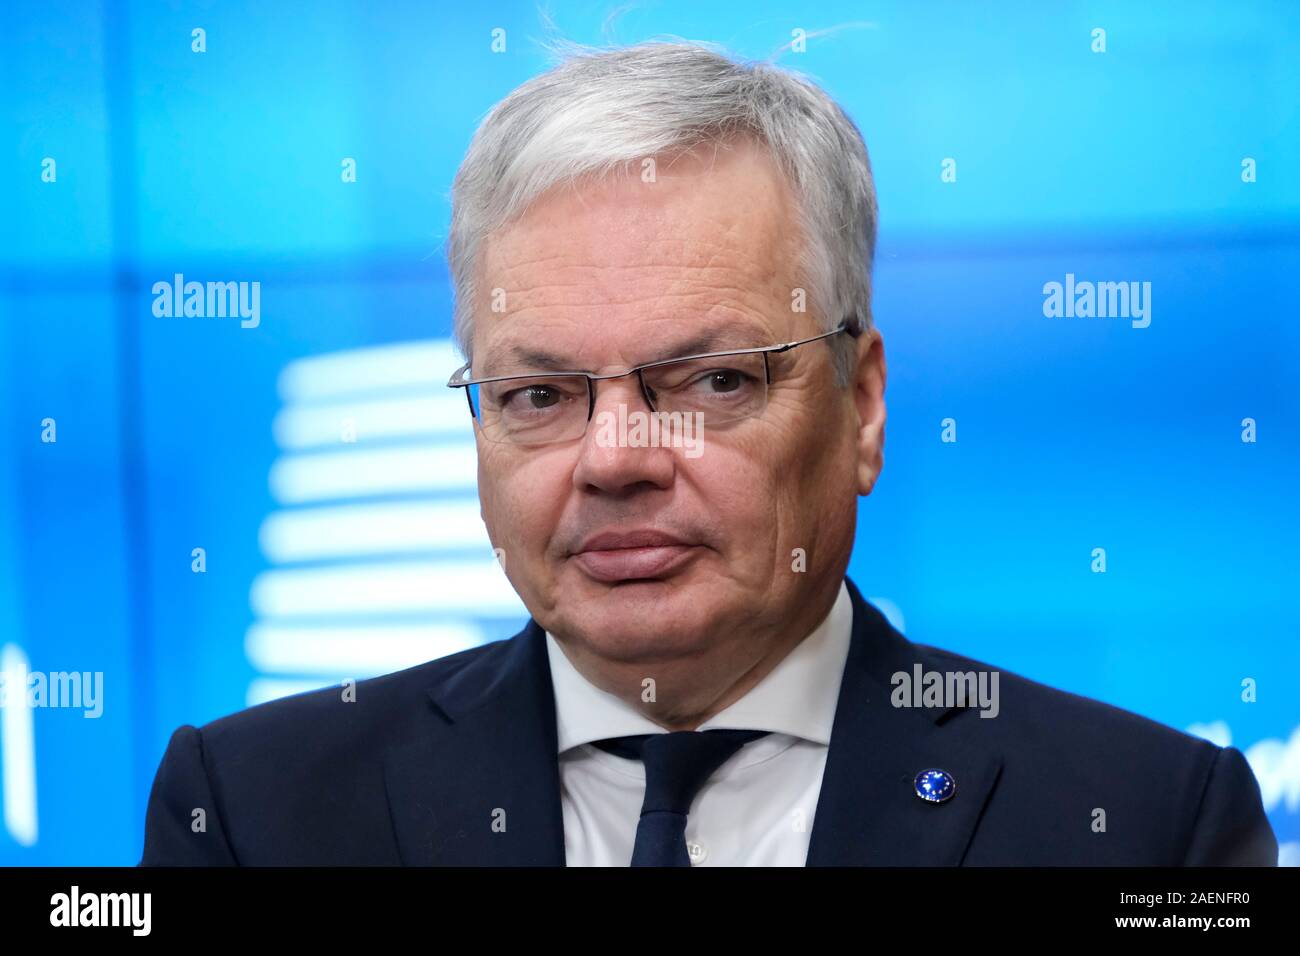 Brussels, Belgium. 10th Dec, 2019. European Commissioner for Justice and rule of law Didier Reynders during an European General Affairs Council. Credit: ALEXANDROS MICHAILIDIS/Alamy Live News Stock Photo